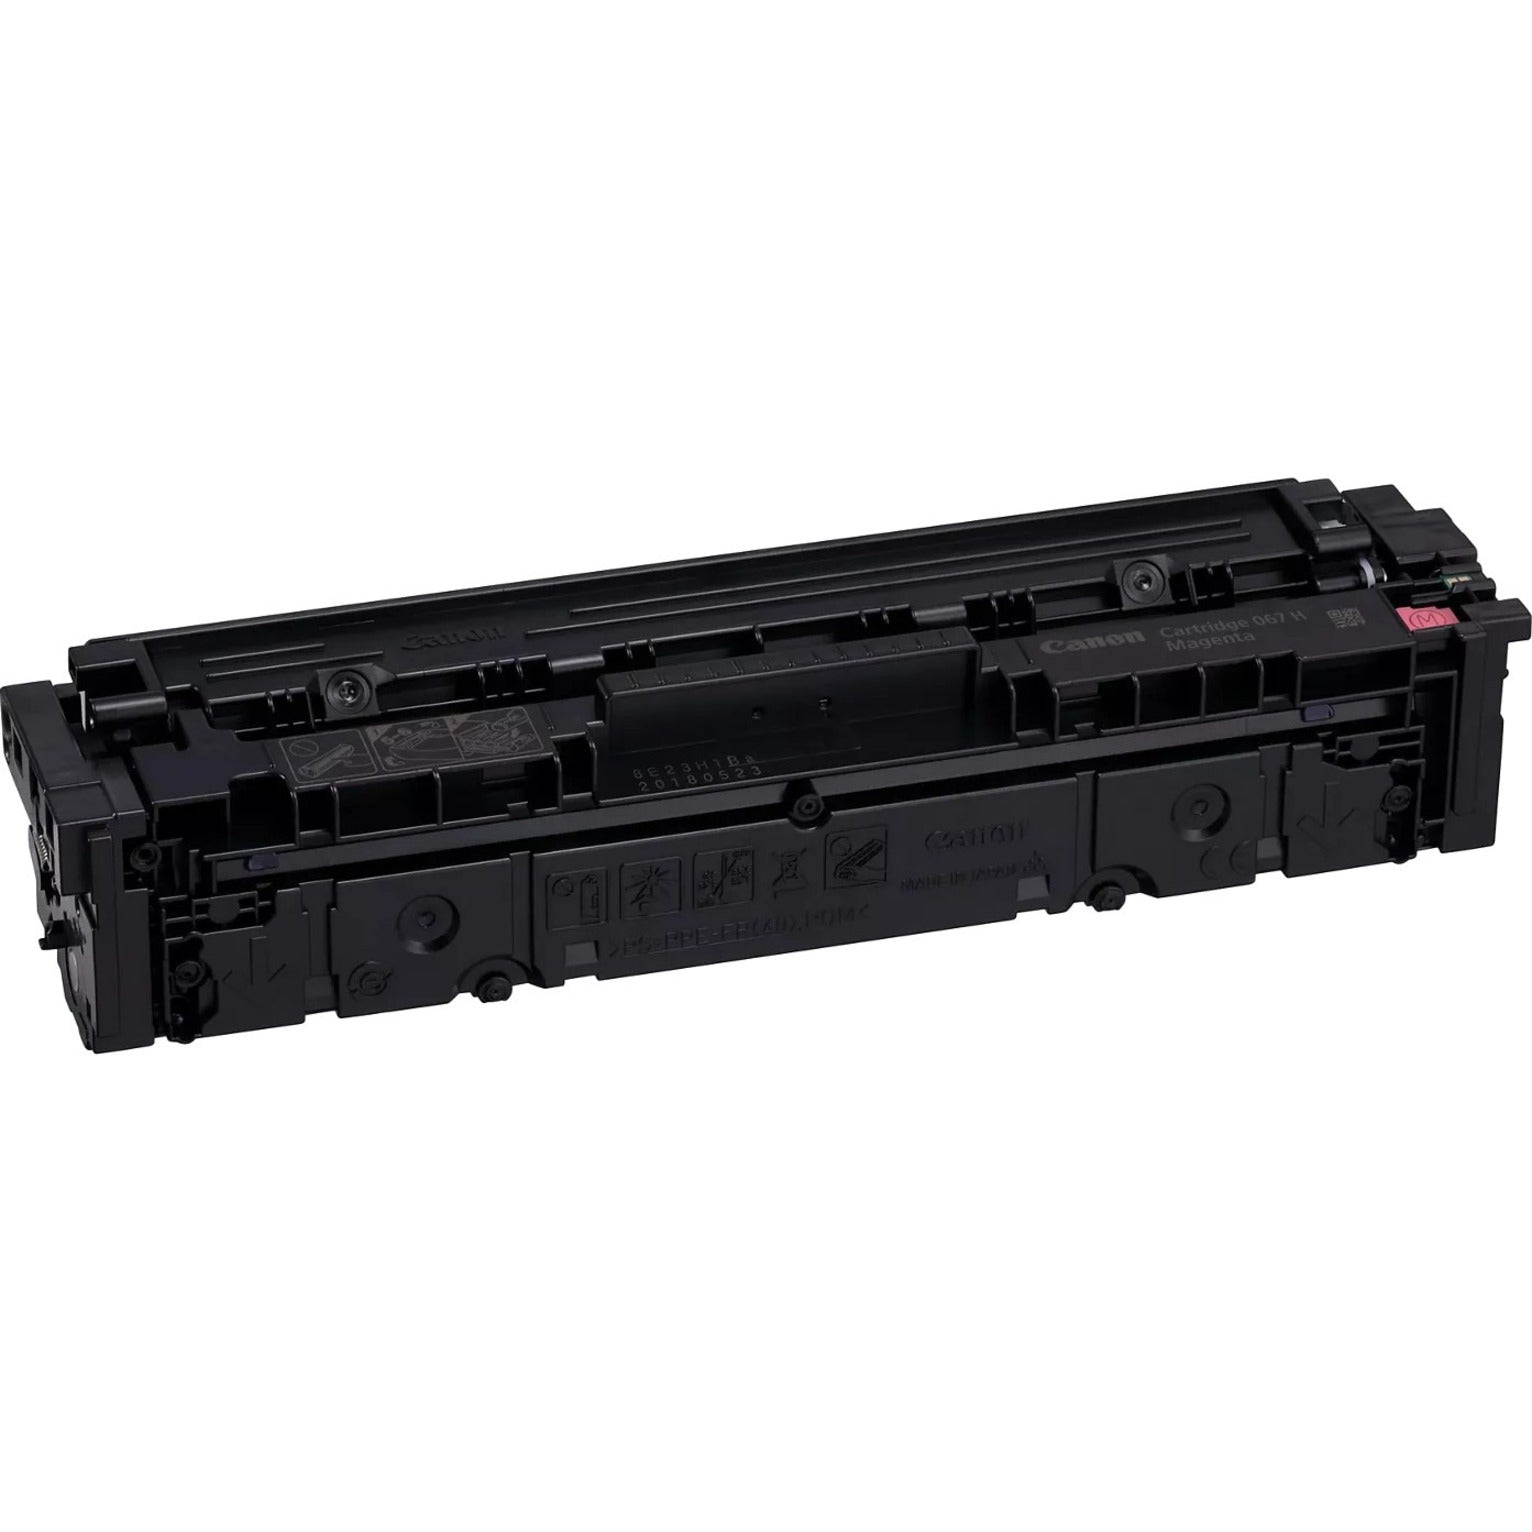 Canon 5104C001 067 Toner Cartridge, High Yield, Magenta, 2350 Pages